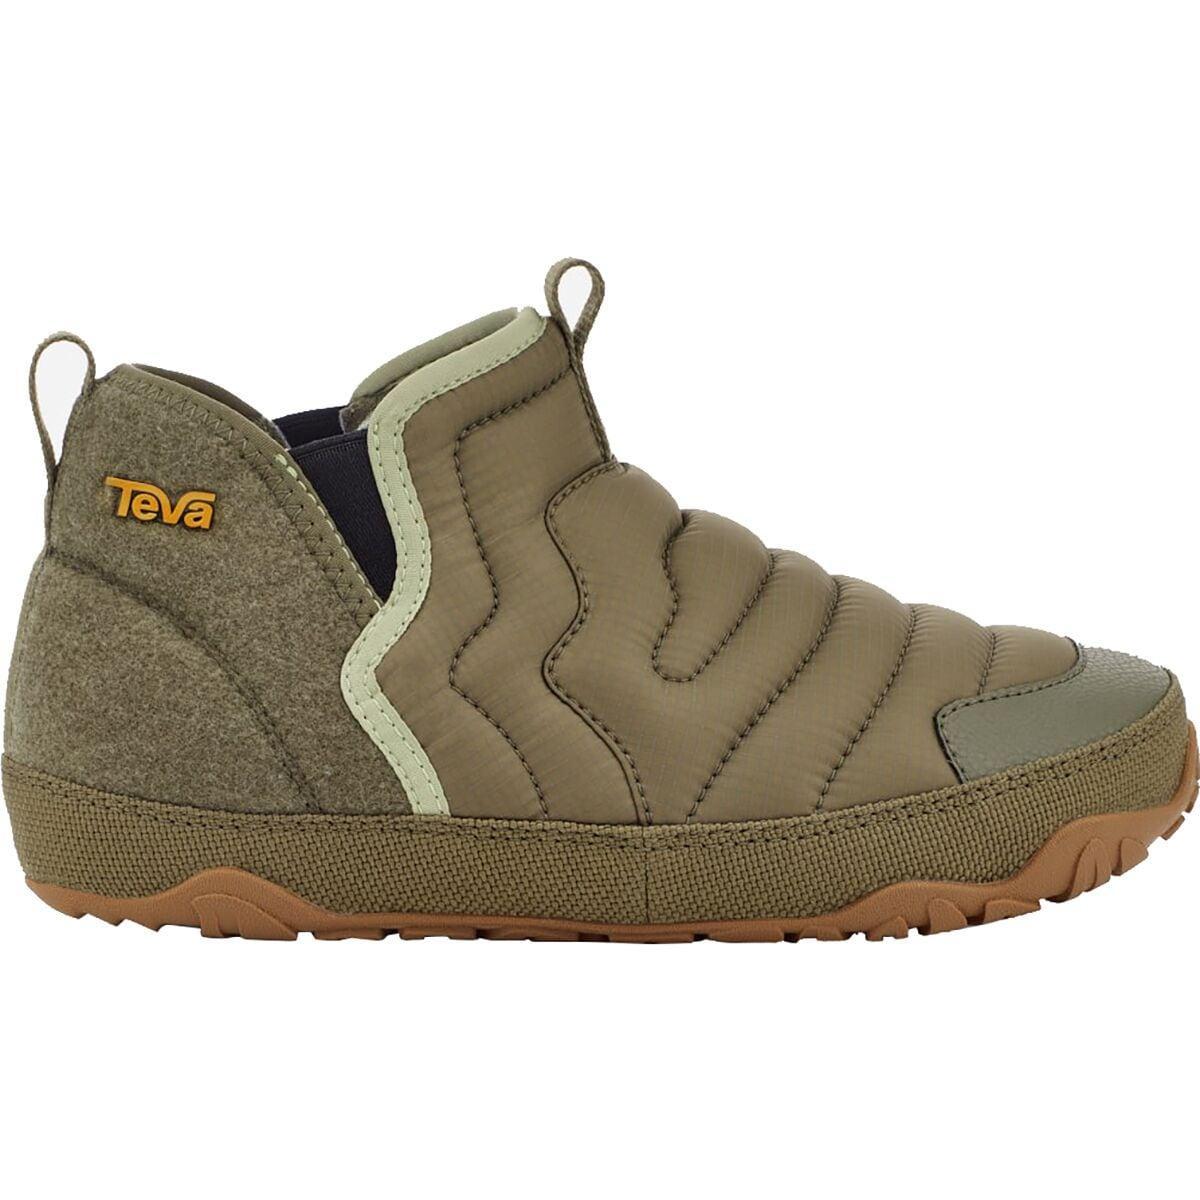 Teva ReEmber Terrain Quilted Mid Slipper Product Image